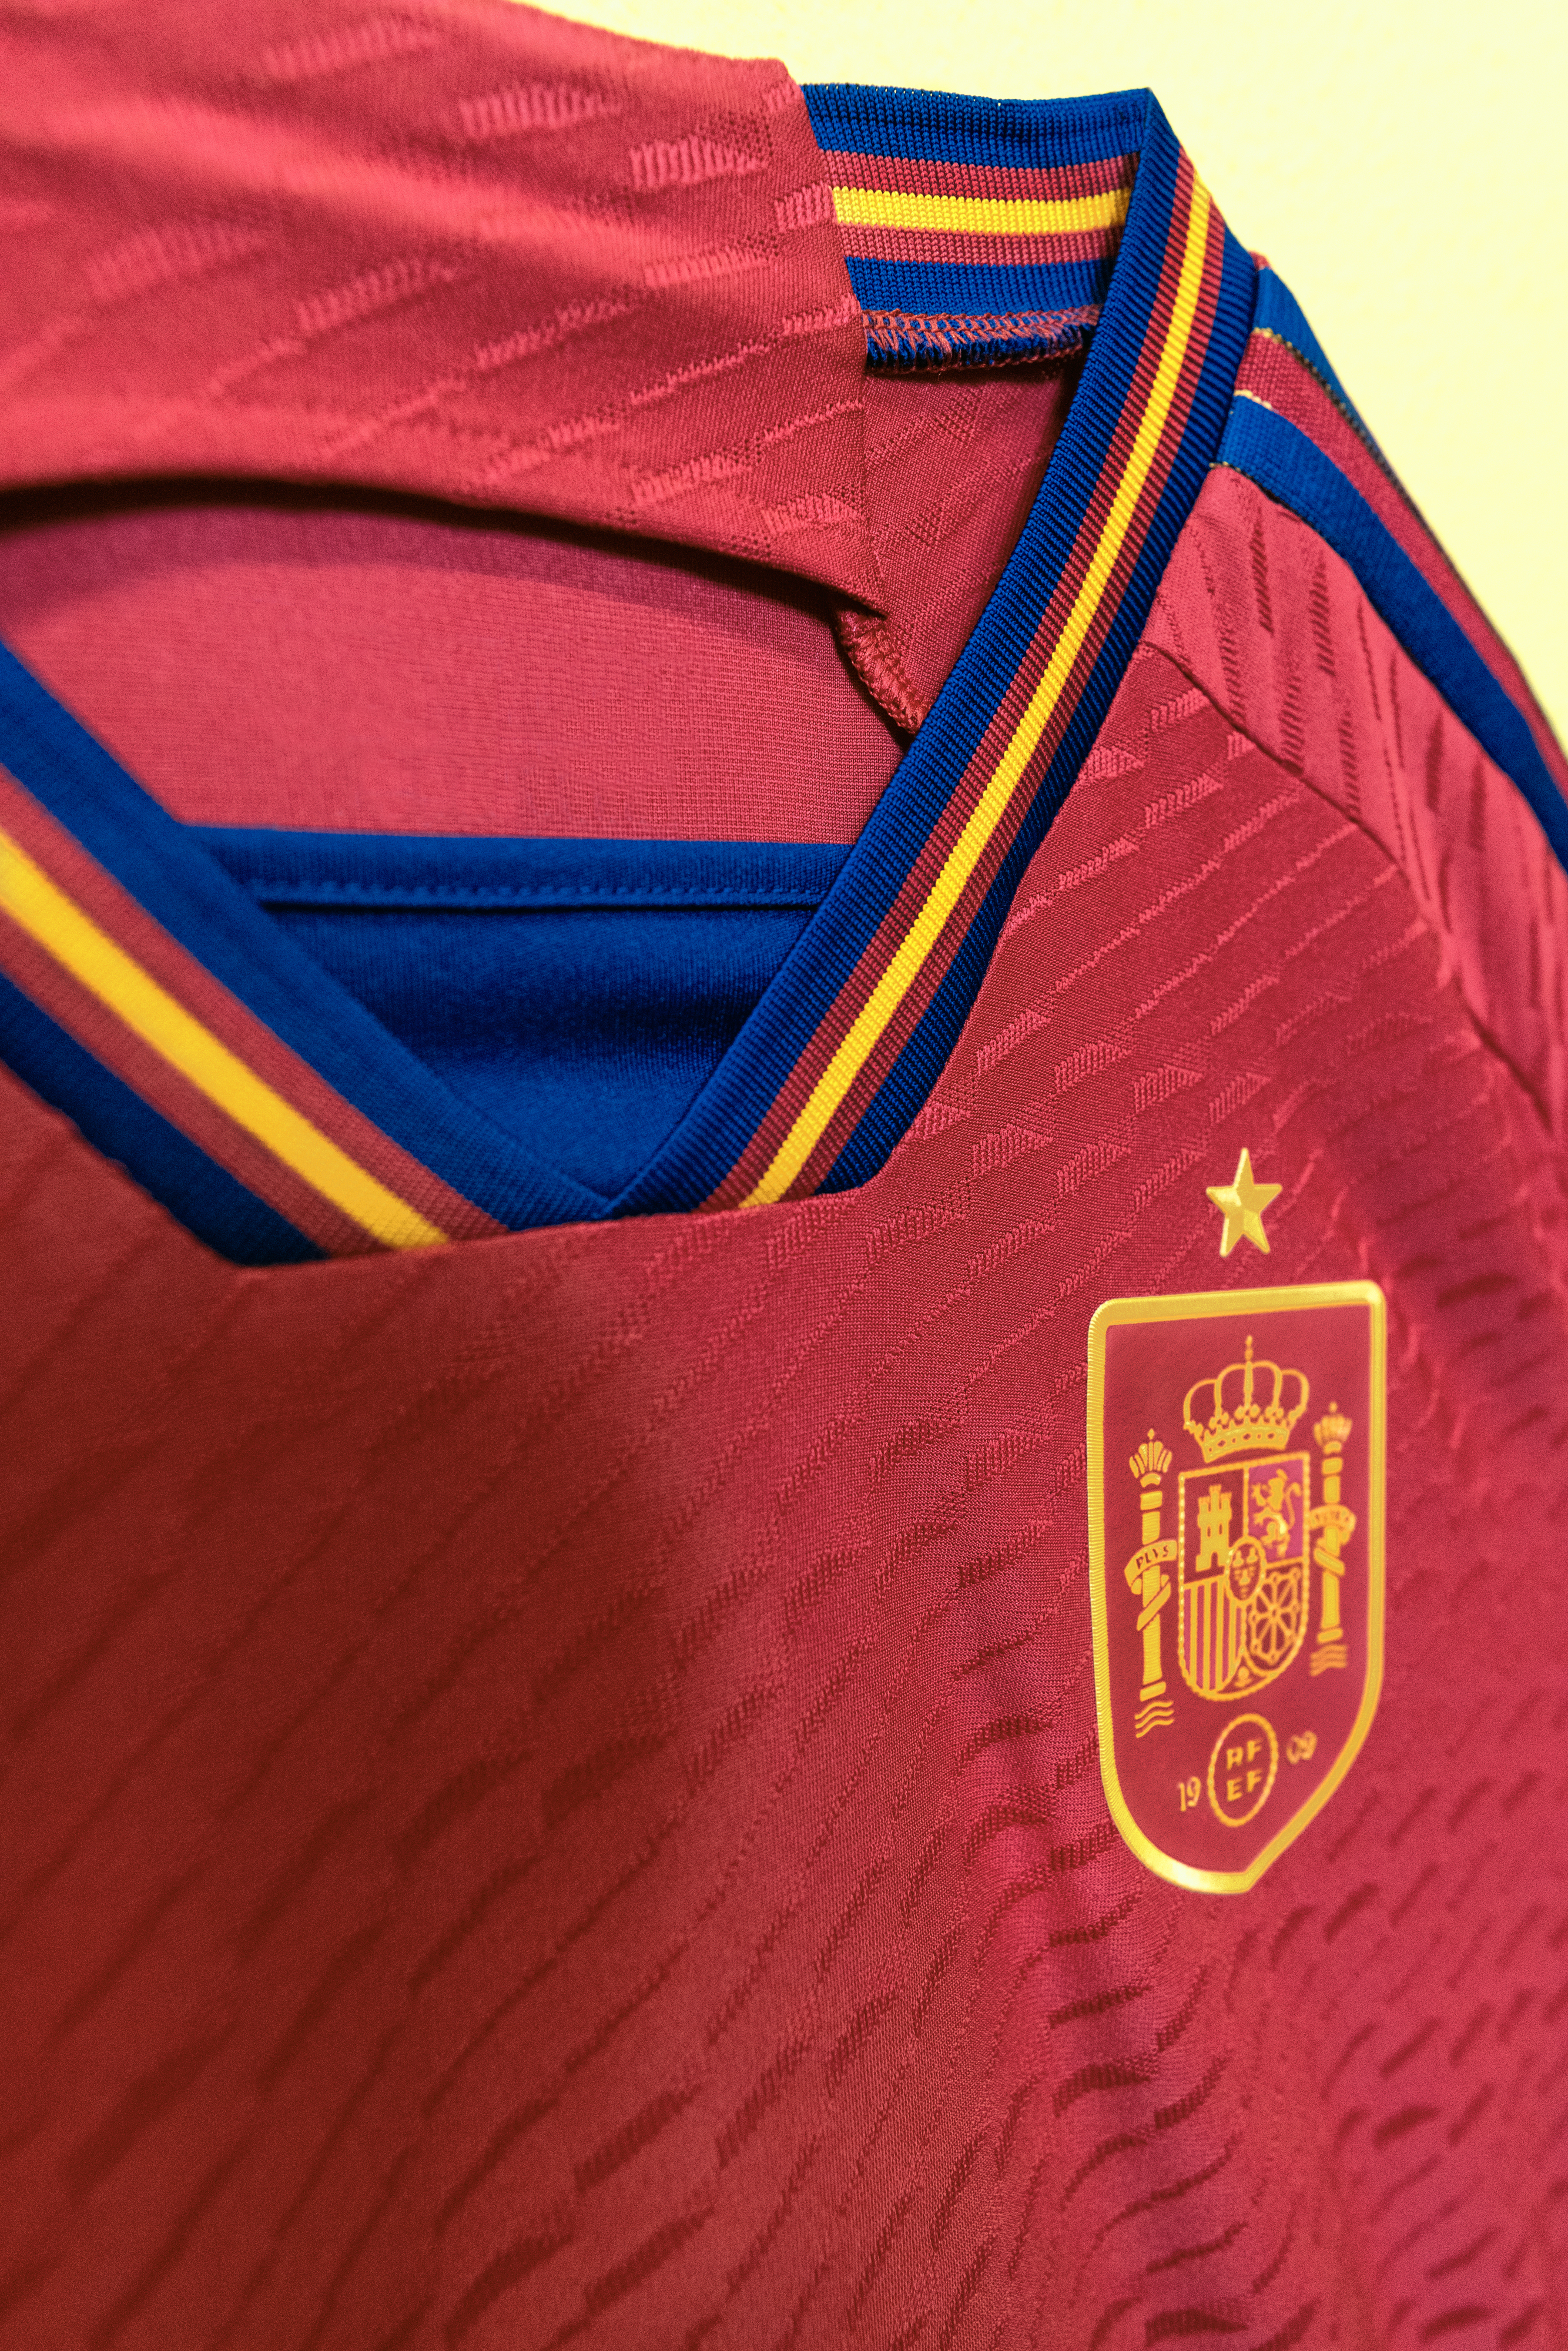 Adidas Reveals FIFA World Cup 2022 Kits - Pursuit Of Dopeness